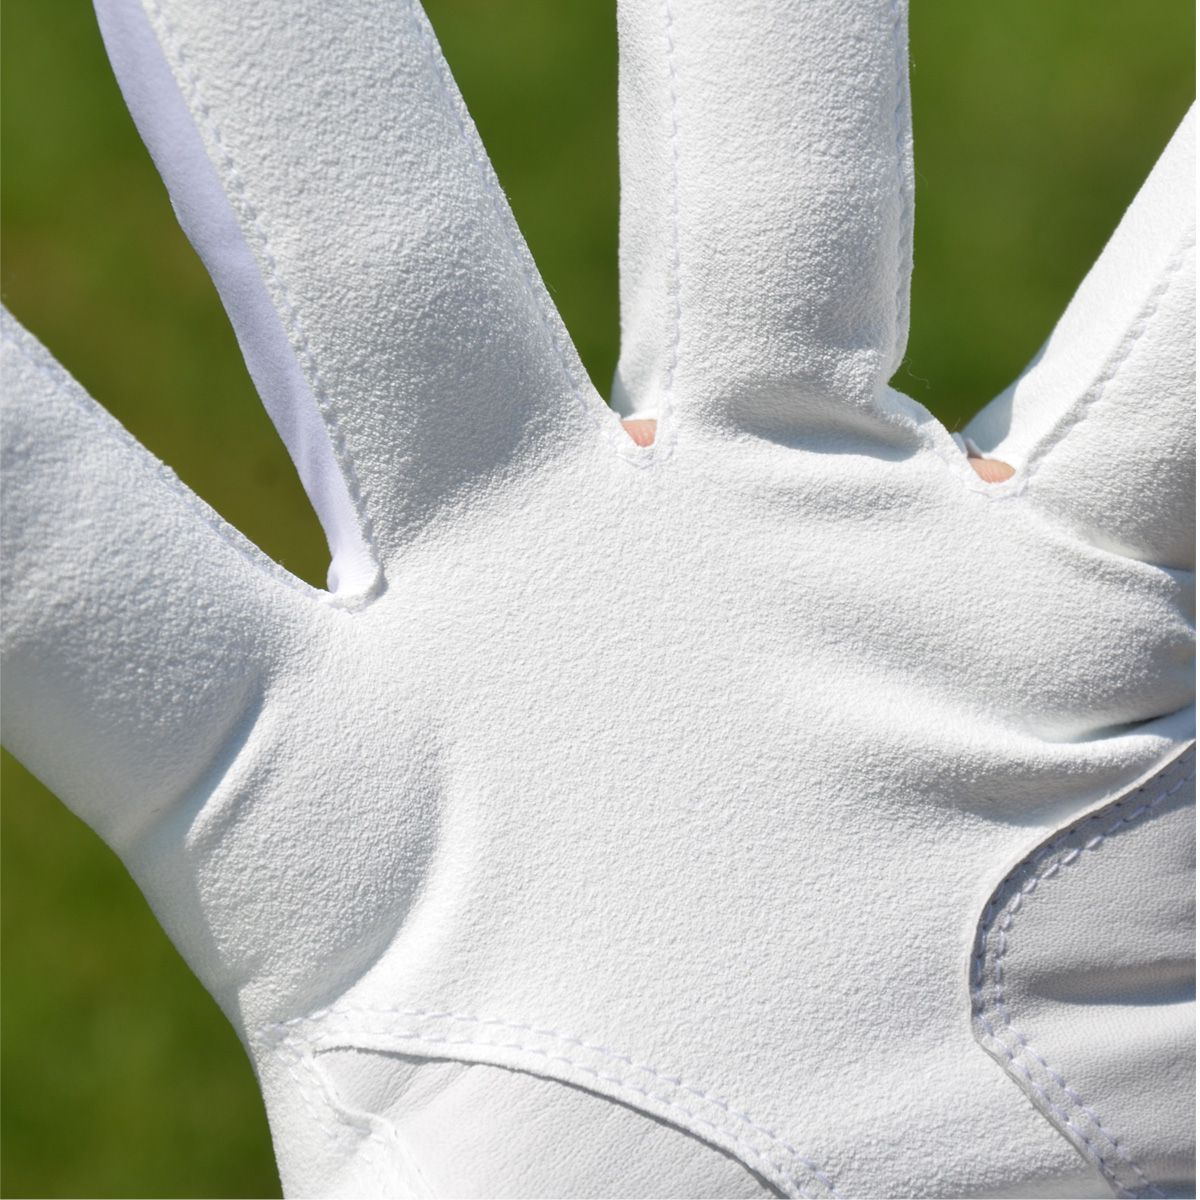 vent hole between the fingers on a Intech Men's Cabretta Leather Golf Glove